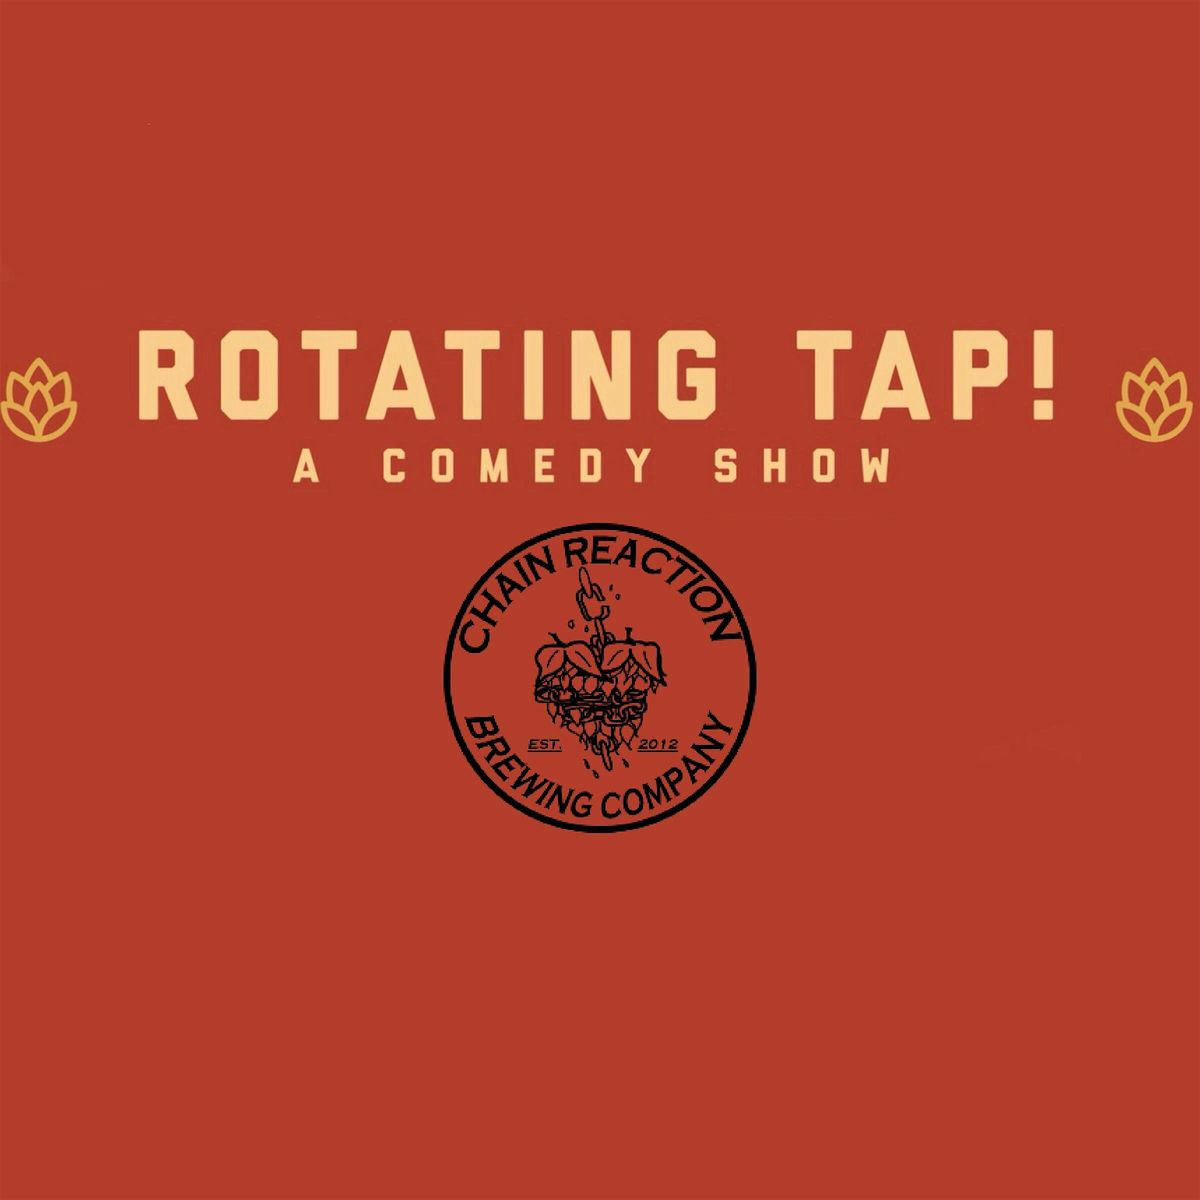 Comedy Night @ Chain Reaction Brewing Presented by Rotating Tap Comedy